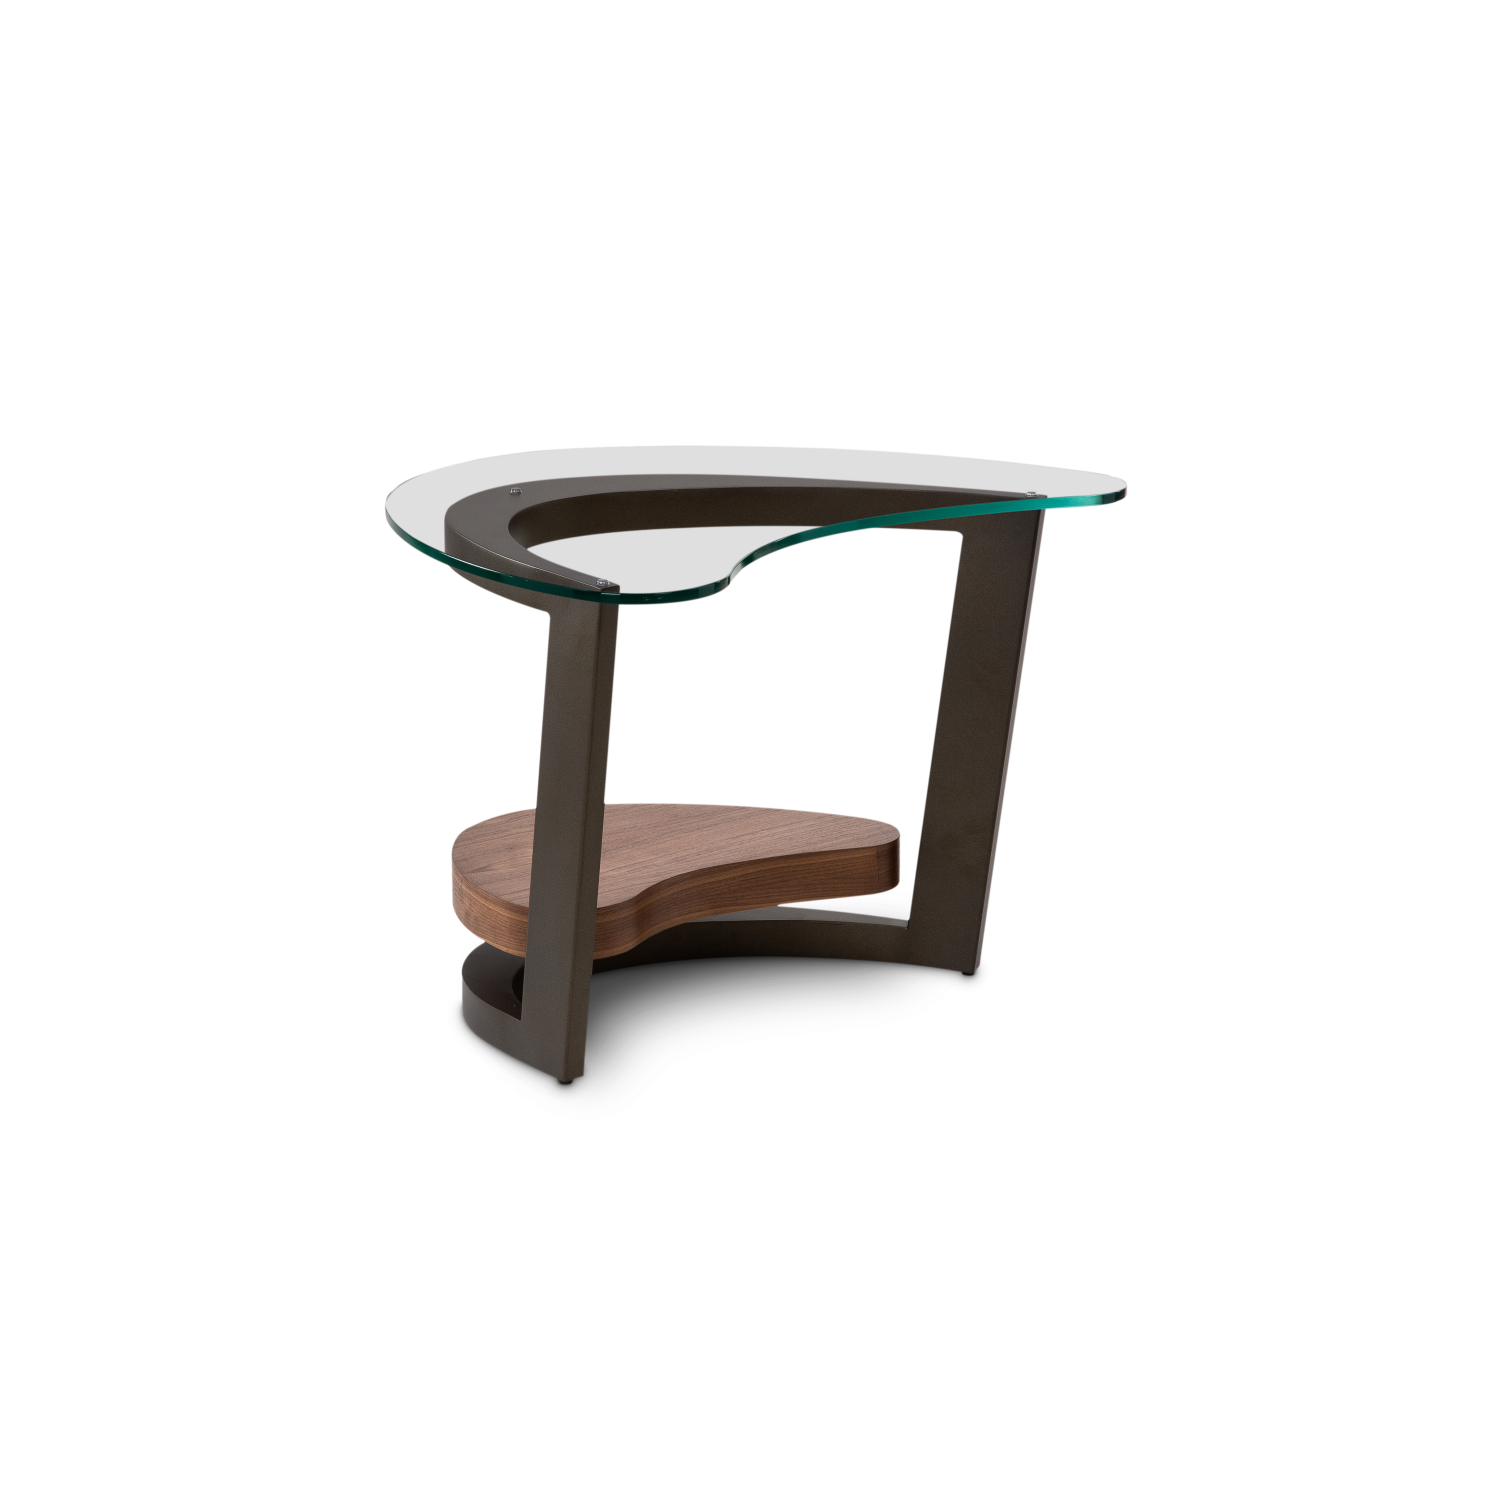 Maui End Table Picture with White Background